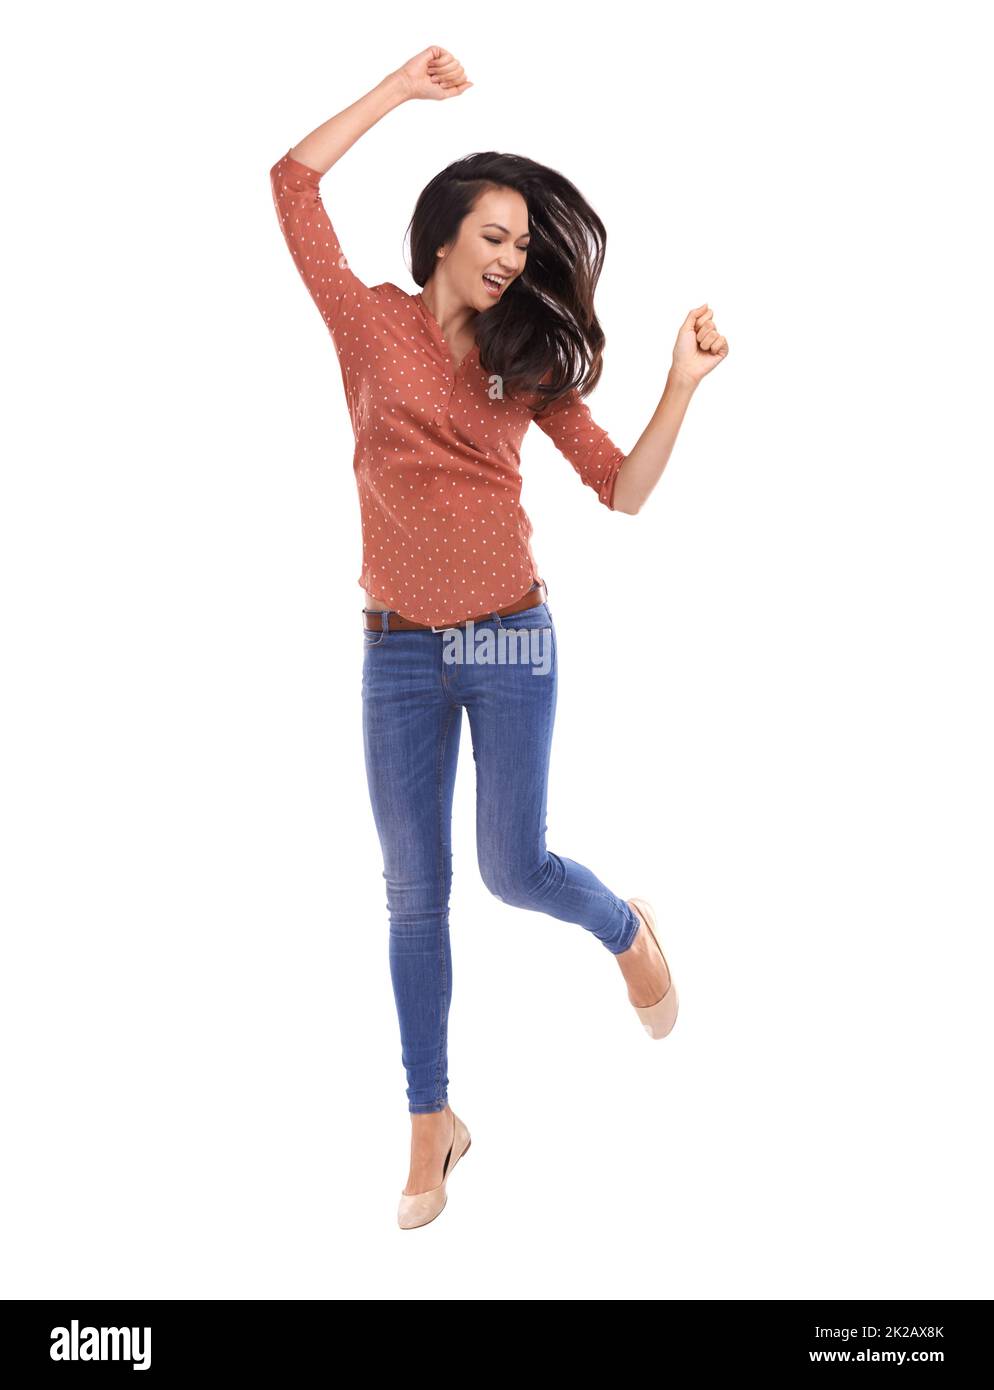 Sometimes you just gotta move. Studio shot of a young woman jumping for joy isolated on white. Stock Photo